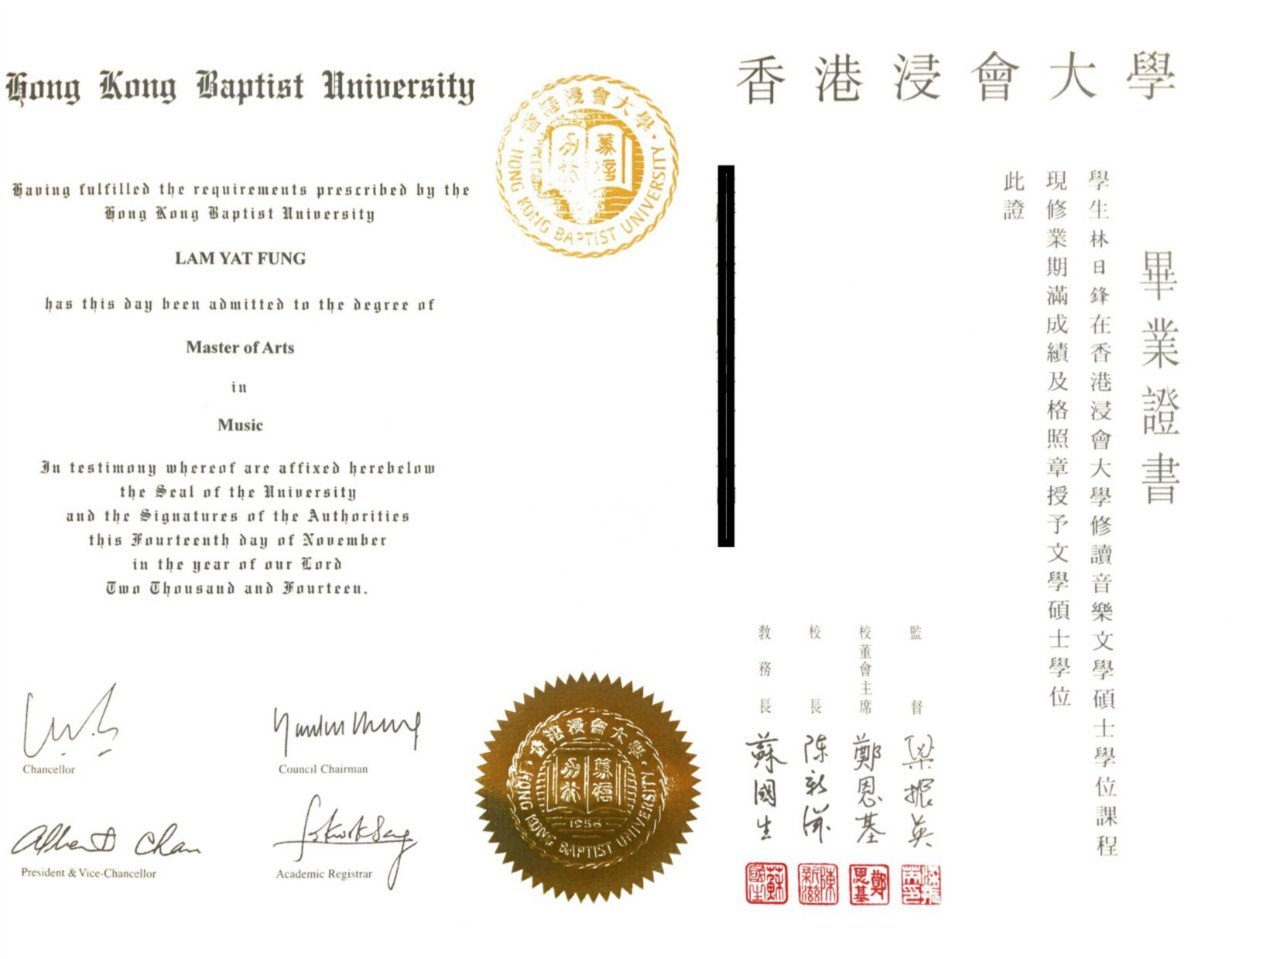 nng Kniig Baptist llmuersity 香港浸會大學 !ふ募 此現學 證修生 蔞auing fulfillrà the requirements prescribeò by the 業林 LAM YAT FUNG 滿鋒 成在 績香未 及港 格浸 照會 章大聿 授學 曰 予修 文讀 has this day bee adted t the degree nf Master of Arts Music 3 testimony wherea are aftixed herebelnm the ¢al nf the n i u ersity an the ignatures of the Authorities this urtrenth day nf Nouember in the ear nf aur Tnrd 碩樂 士文 學學 位碩 教校校監 務 Chancellor Council Chairman President & Vice-Chancellor Academic Registrar  text